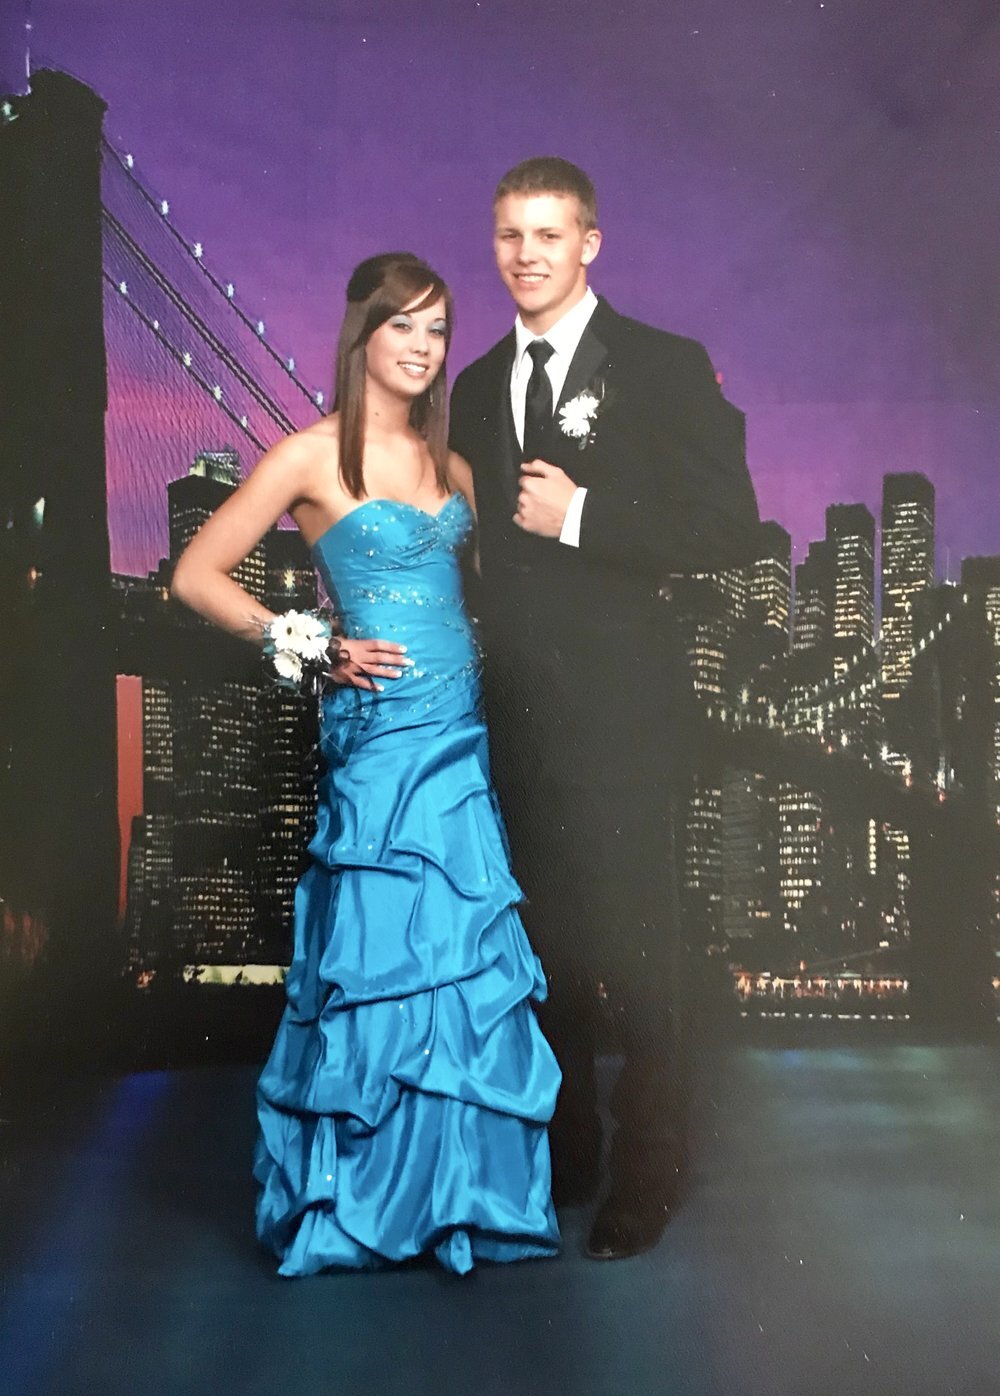 a picture of my wife and i at our high school prom.